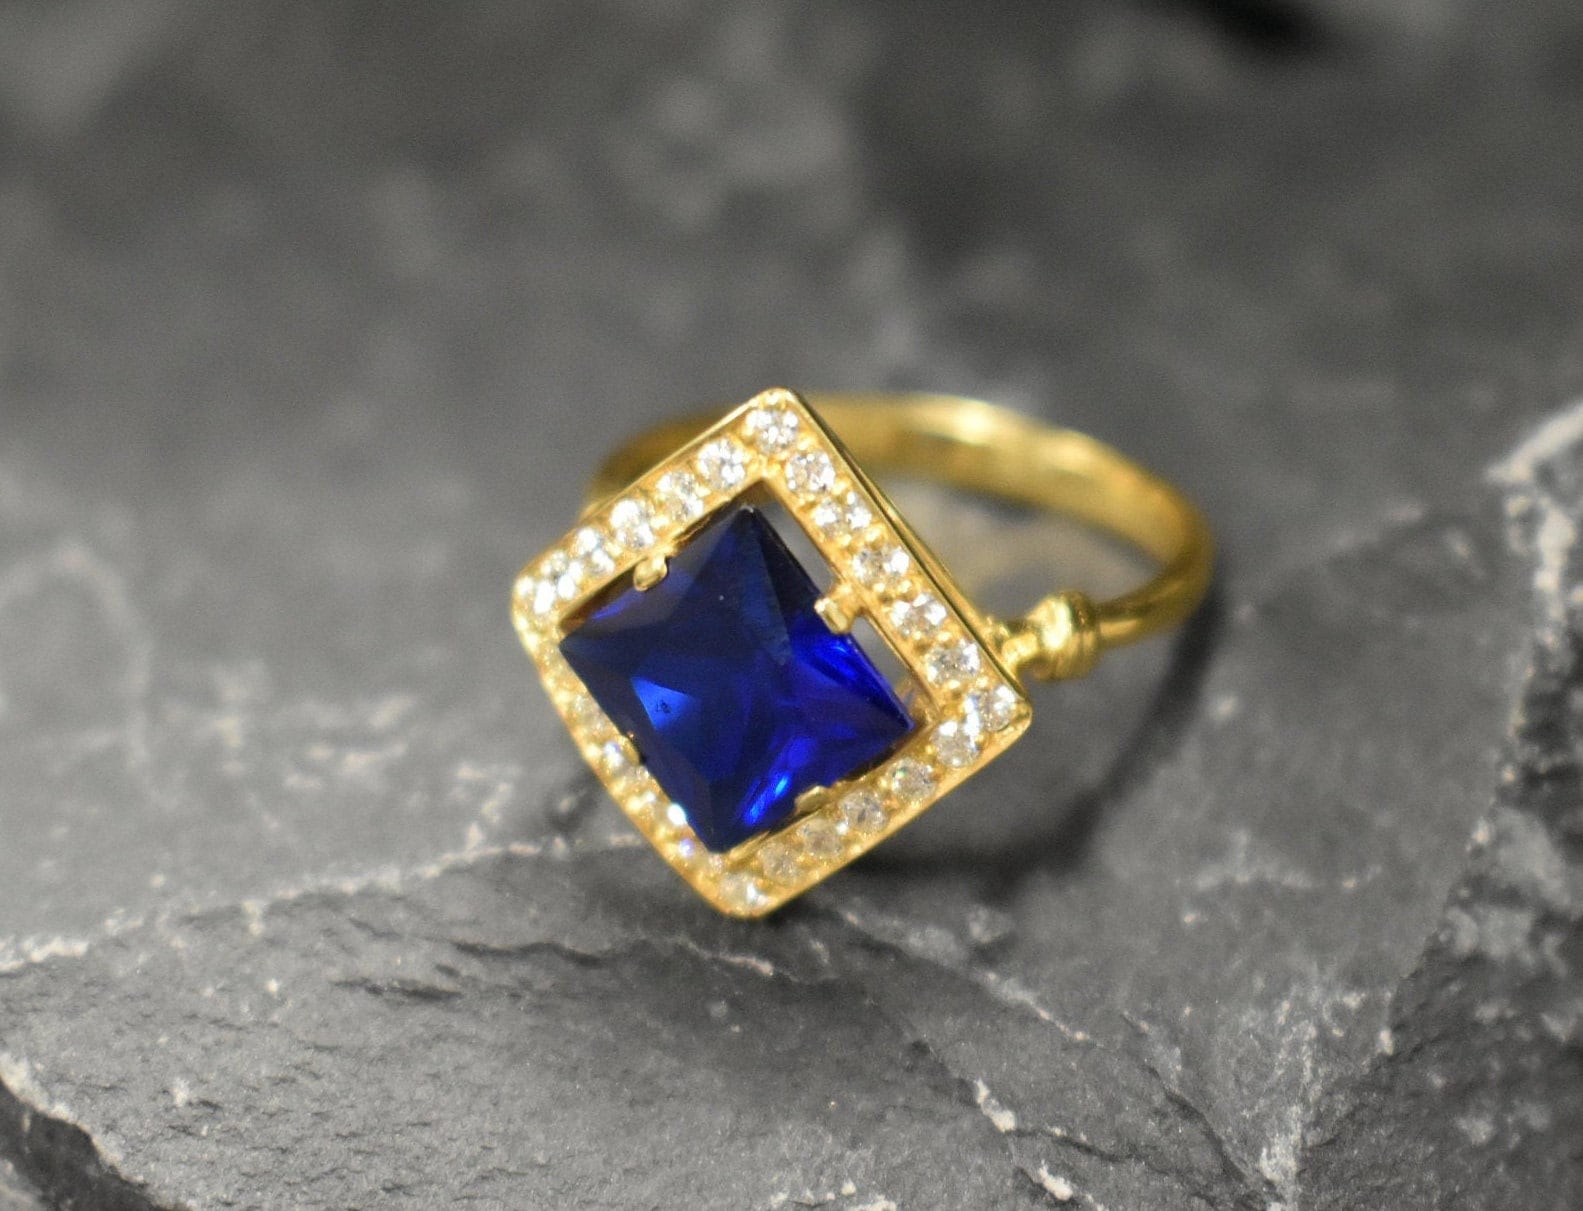 Gold Sapphire Ring, Sapphire Ring, Created Sapphire, Gold Square Ring, Royal Blue Ring, Blue Vintage Ring, 18K Gold Ring, 925 Silver Ring